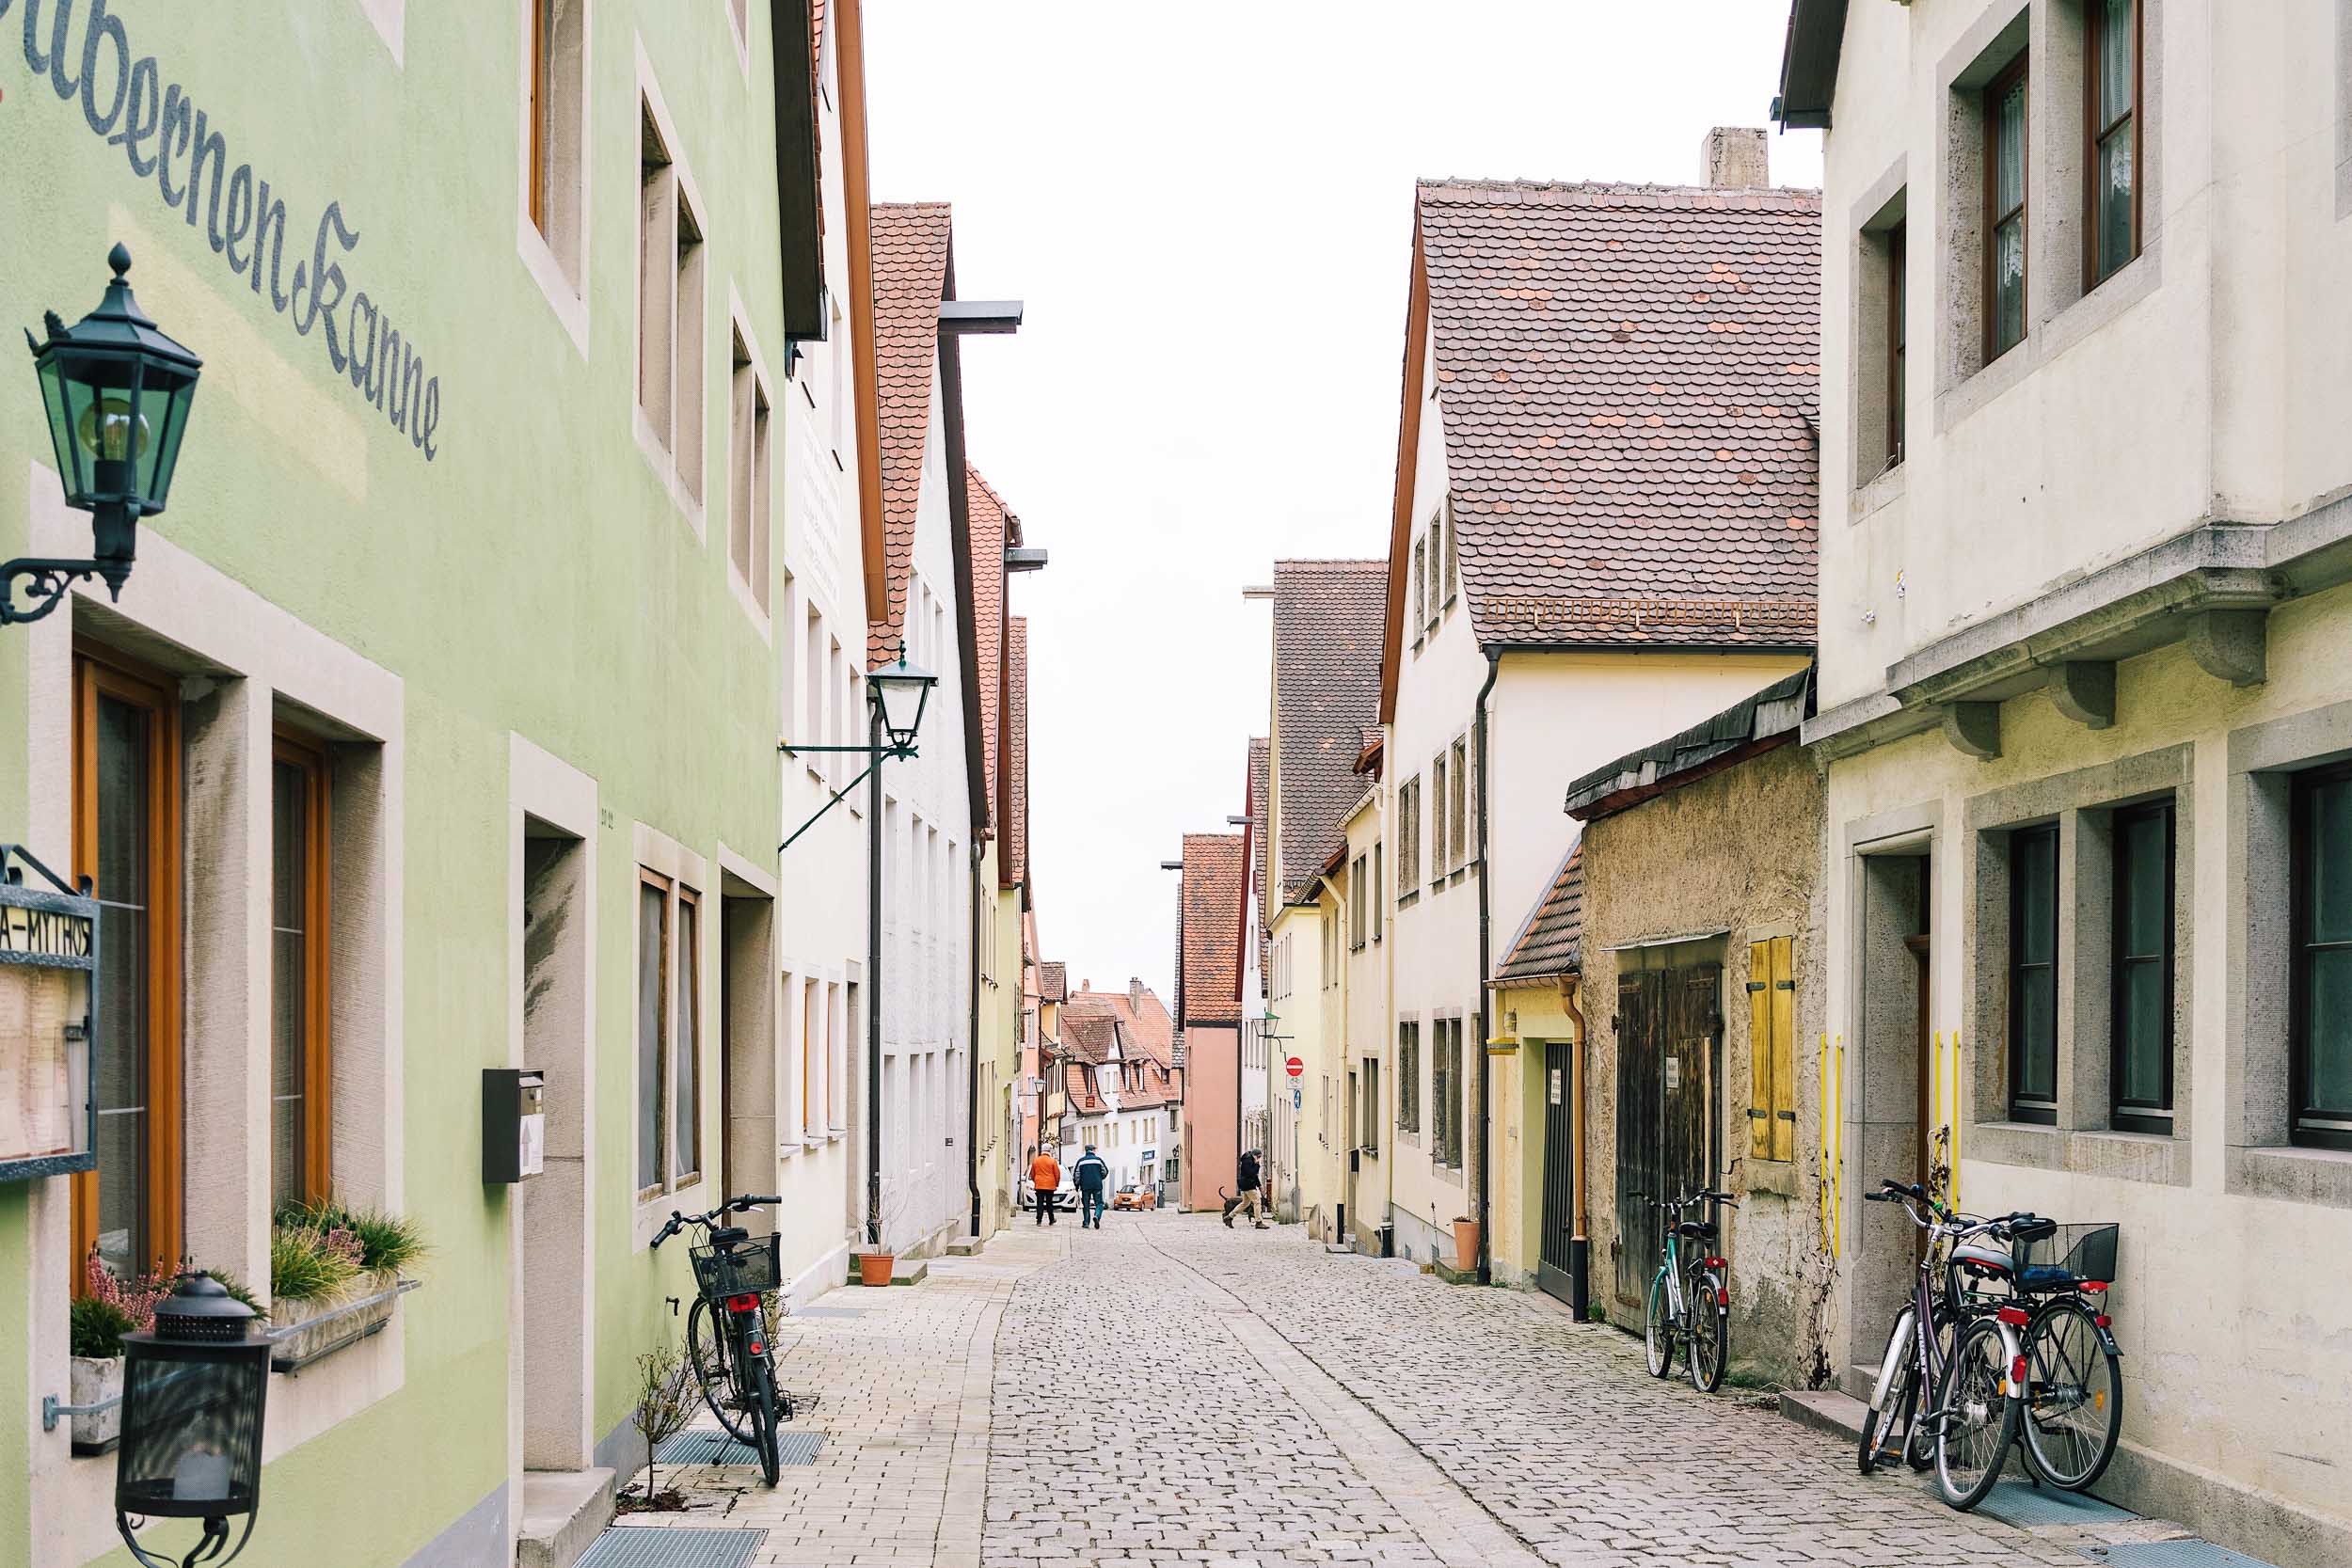 The charming town of Rothenburg